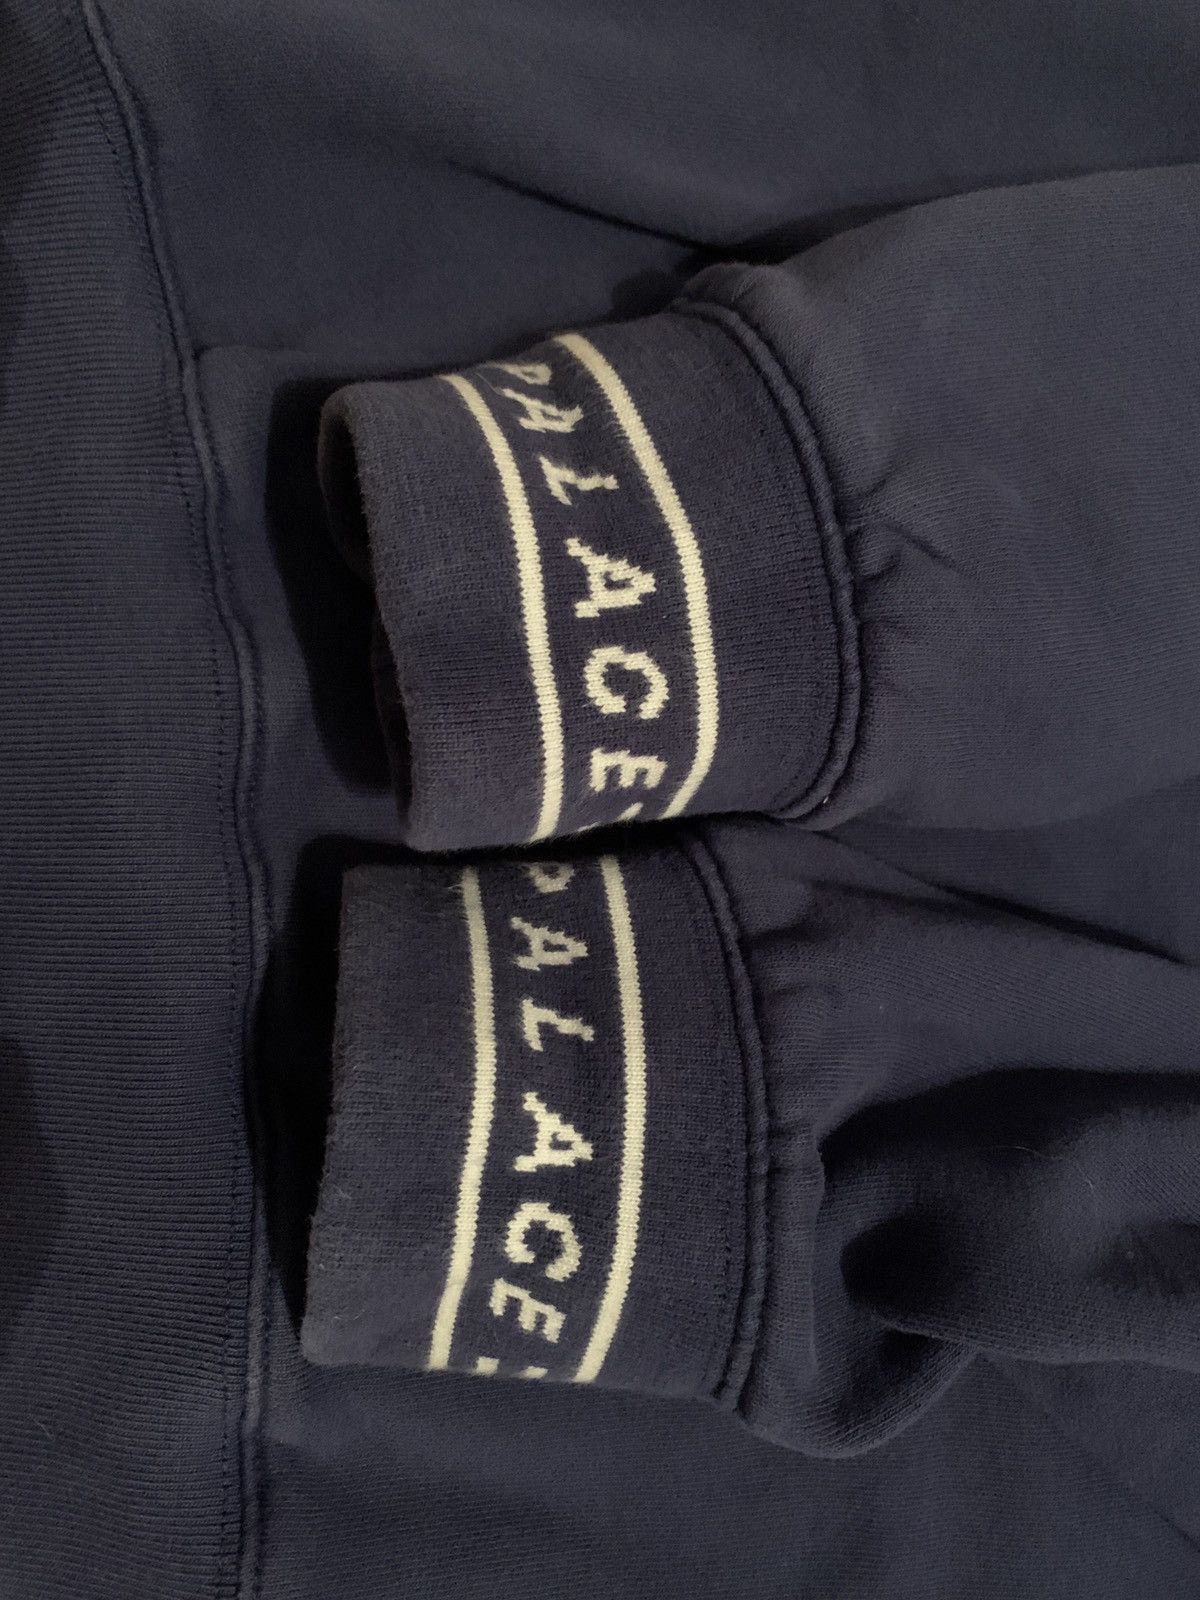 Palace Palace pullover sweater Size US S / EU 44-46 / 1 - 2 Preview